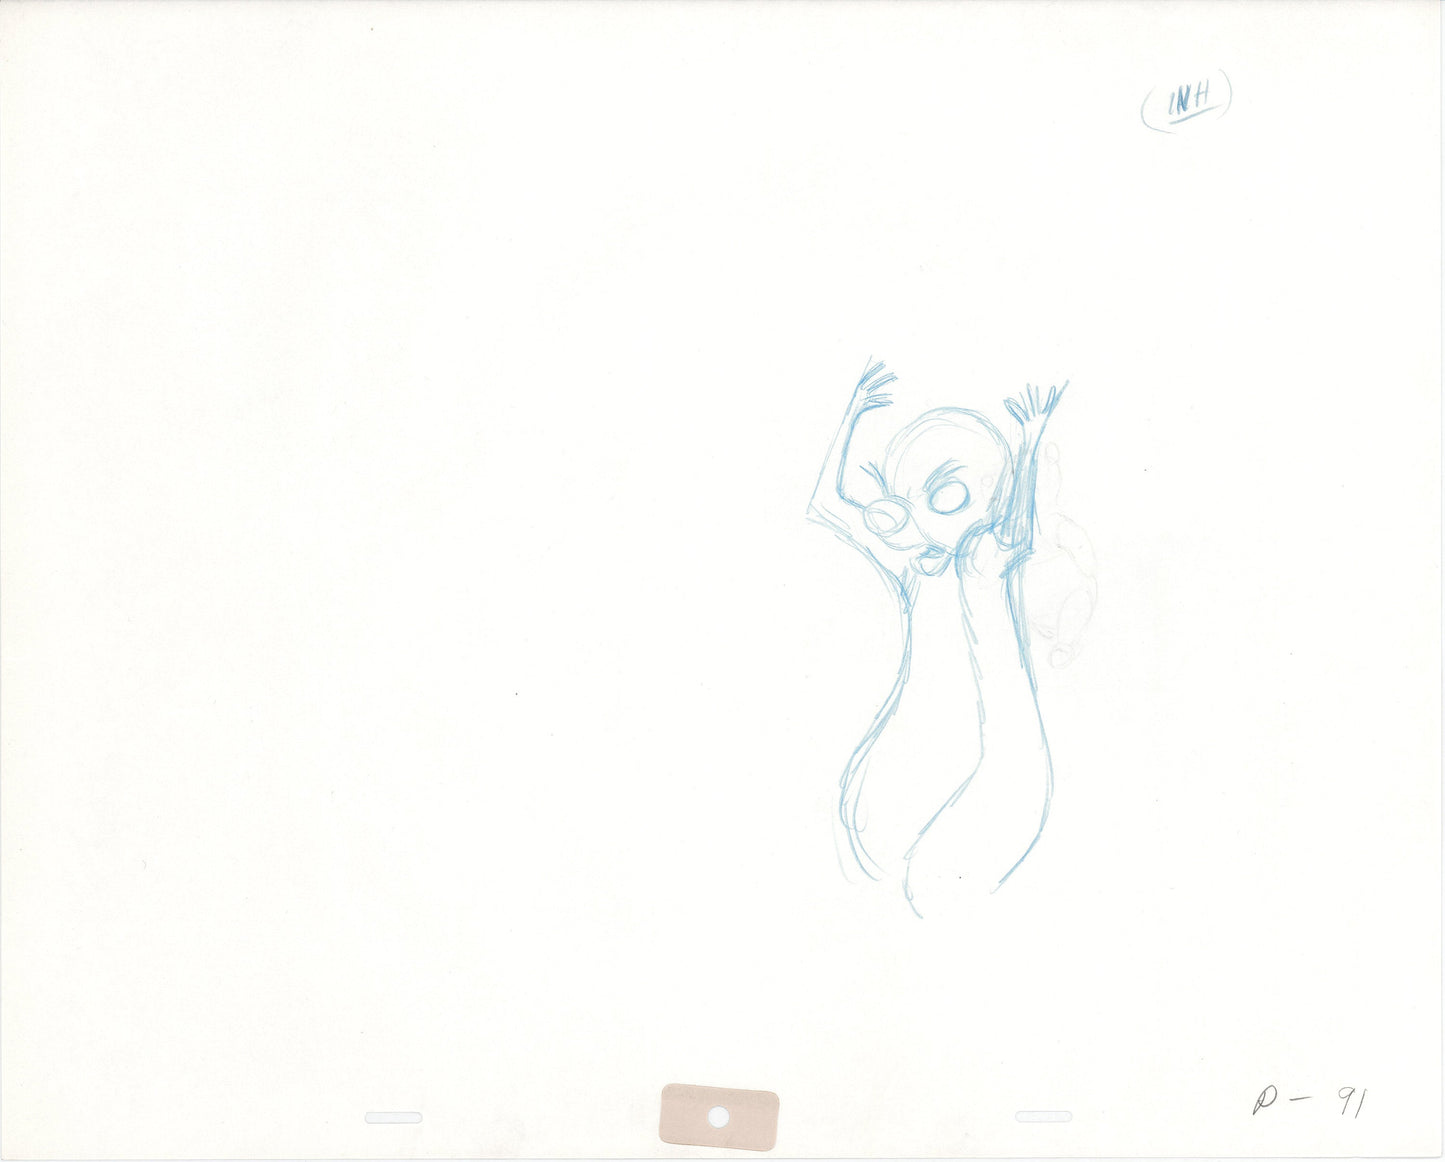 Winnie the Pooh Rabbit Walt Disney Production Animation Cel Drawing b3226 with Dialogue!